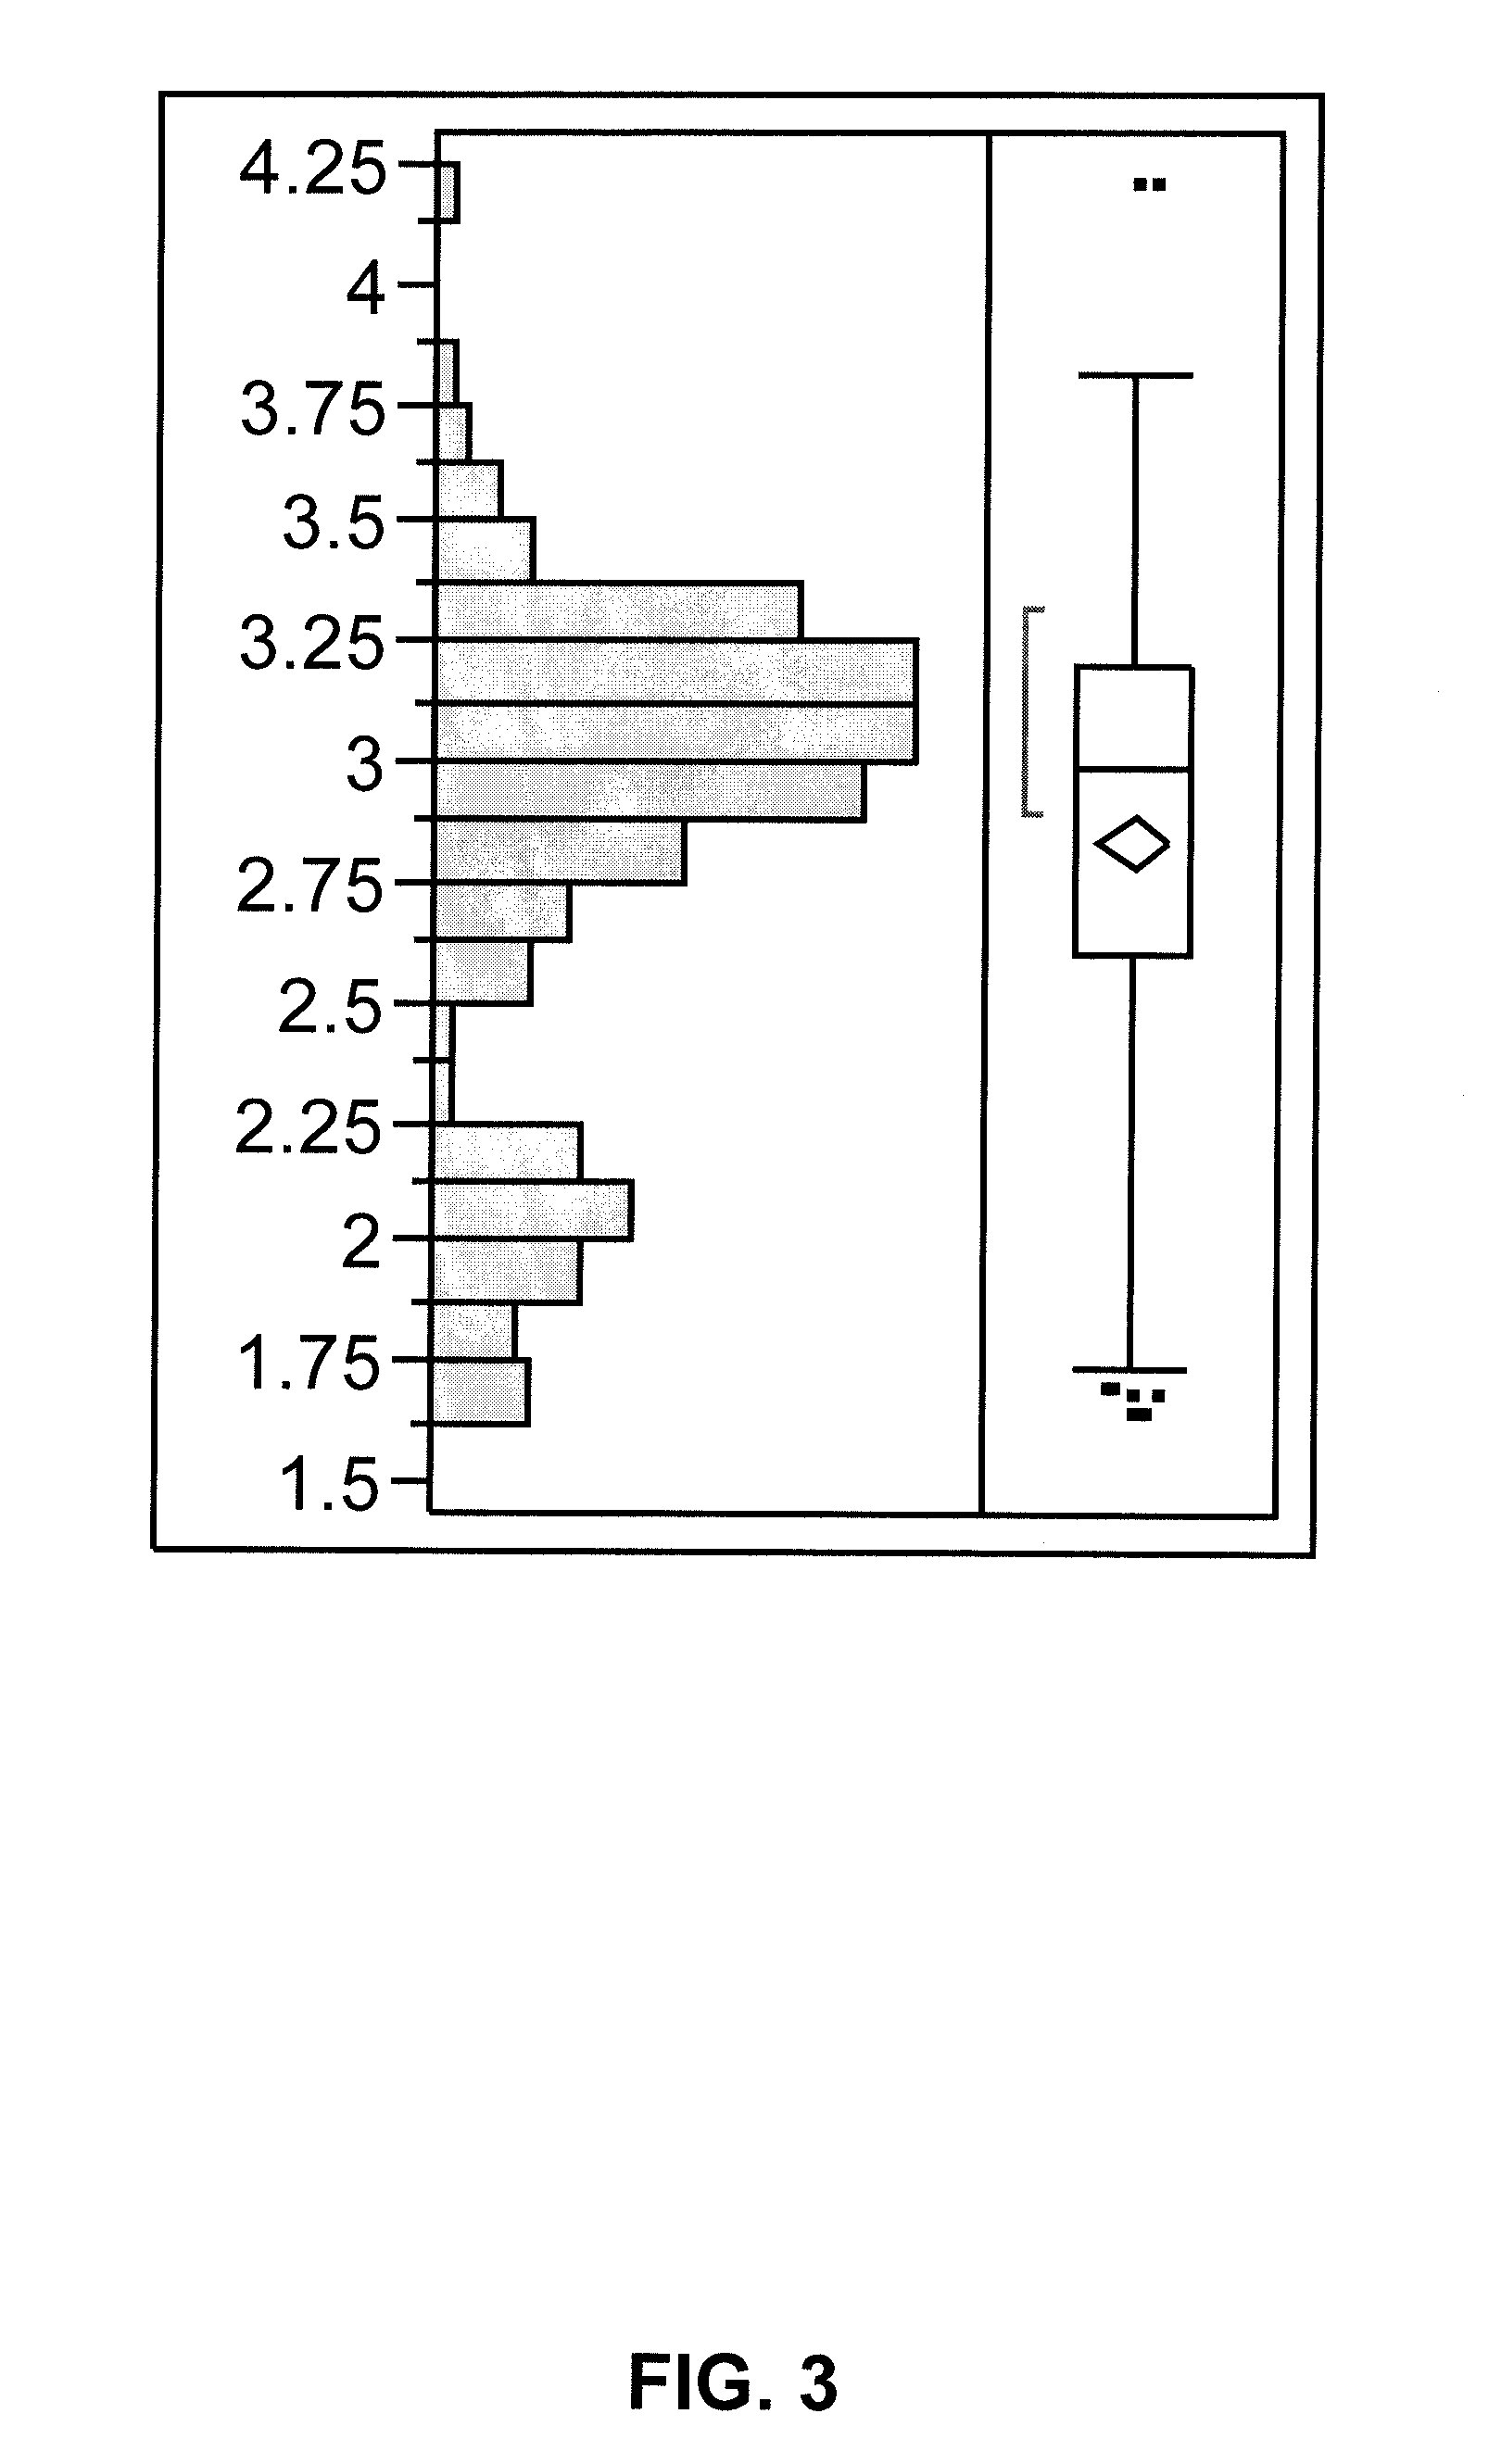 Molecular markers for low palmitic acid content in sunflower (helianthus annus), and methods of using the same